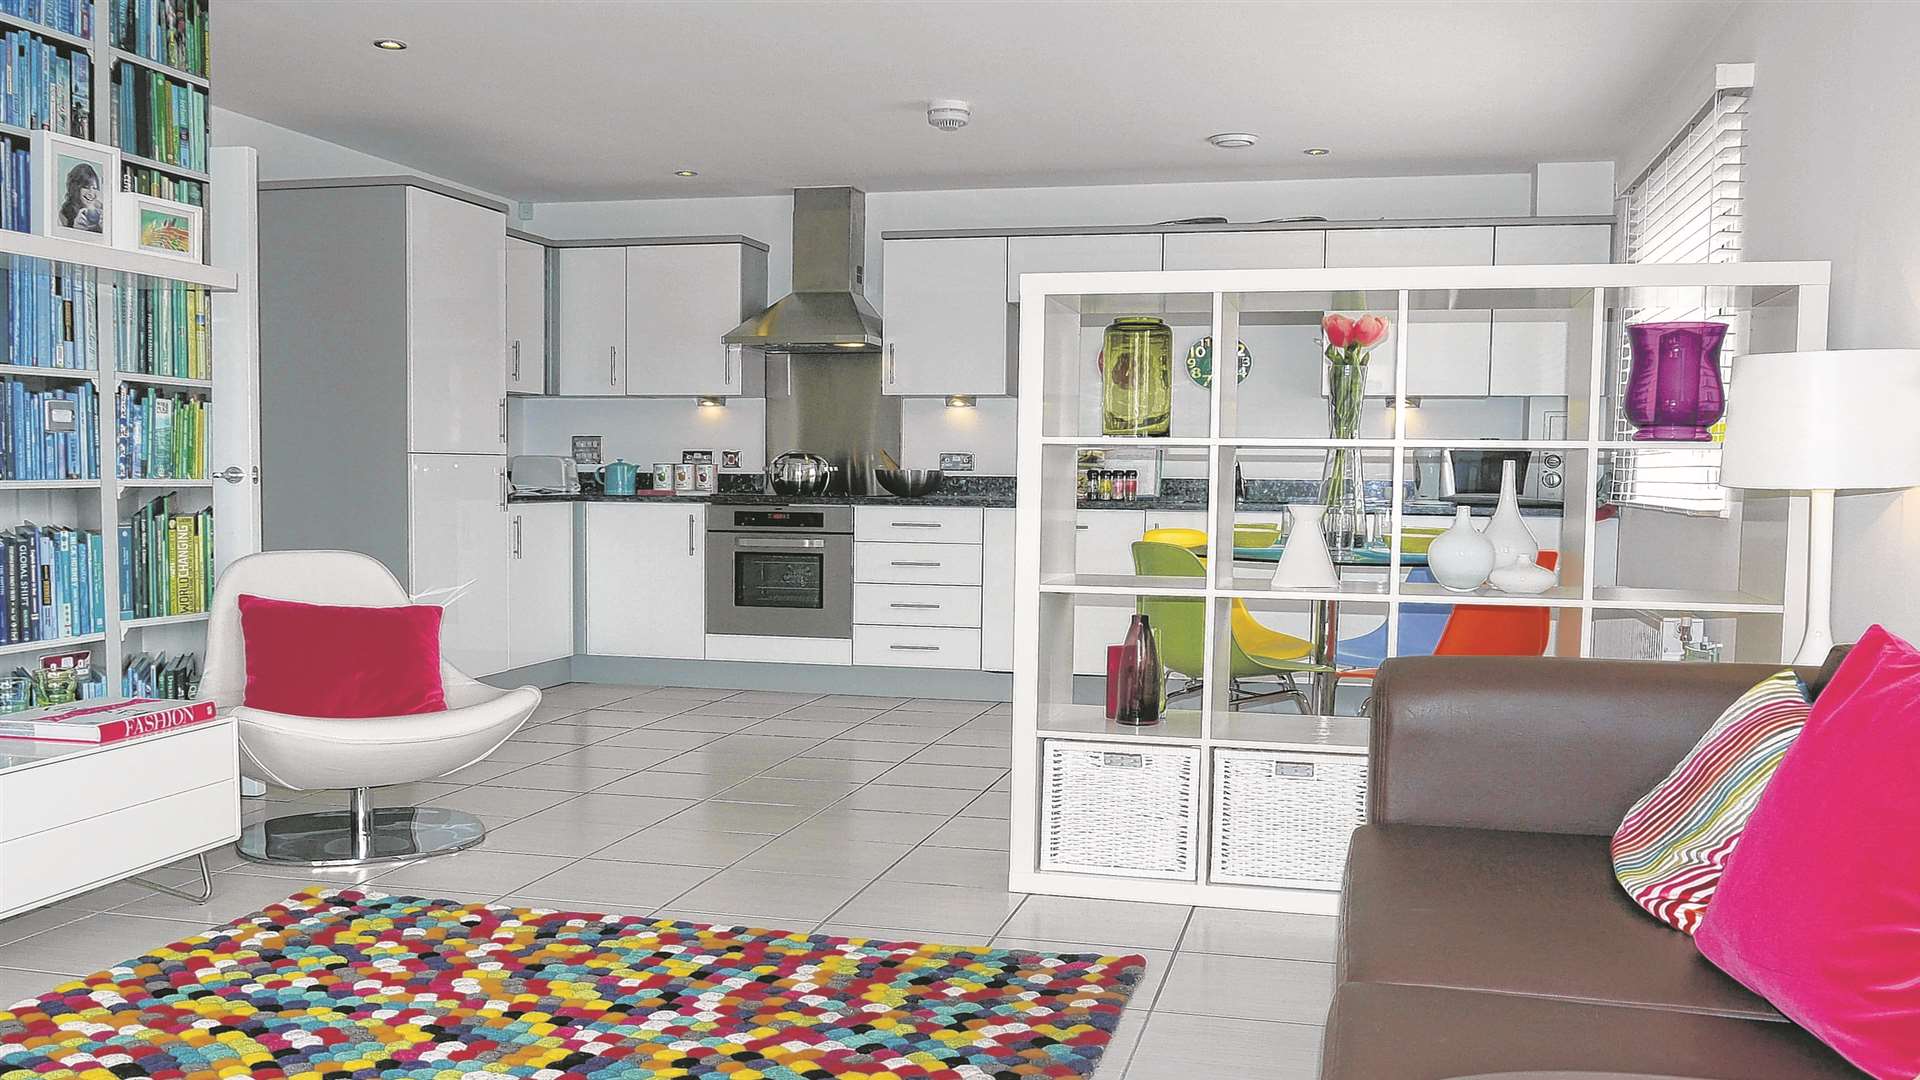 The kitchen diner of a Taylor Wimpey home at The Bridge, Dartford